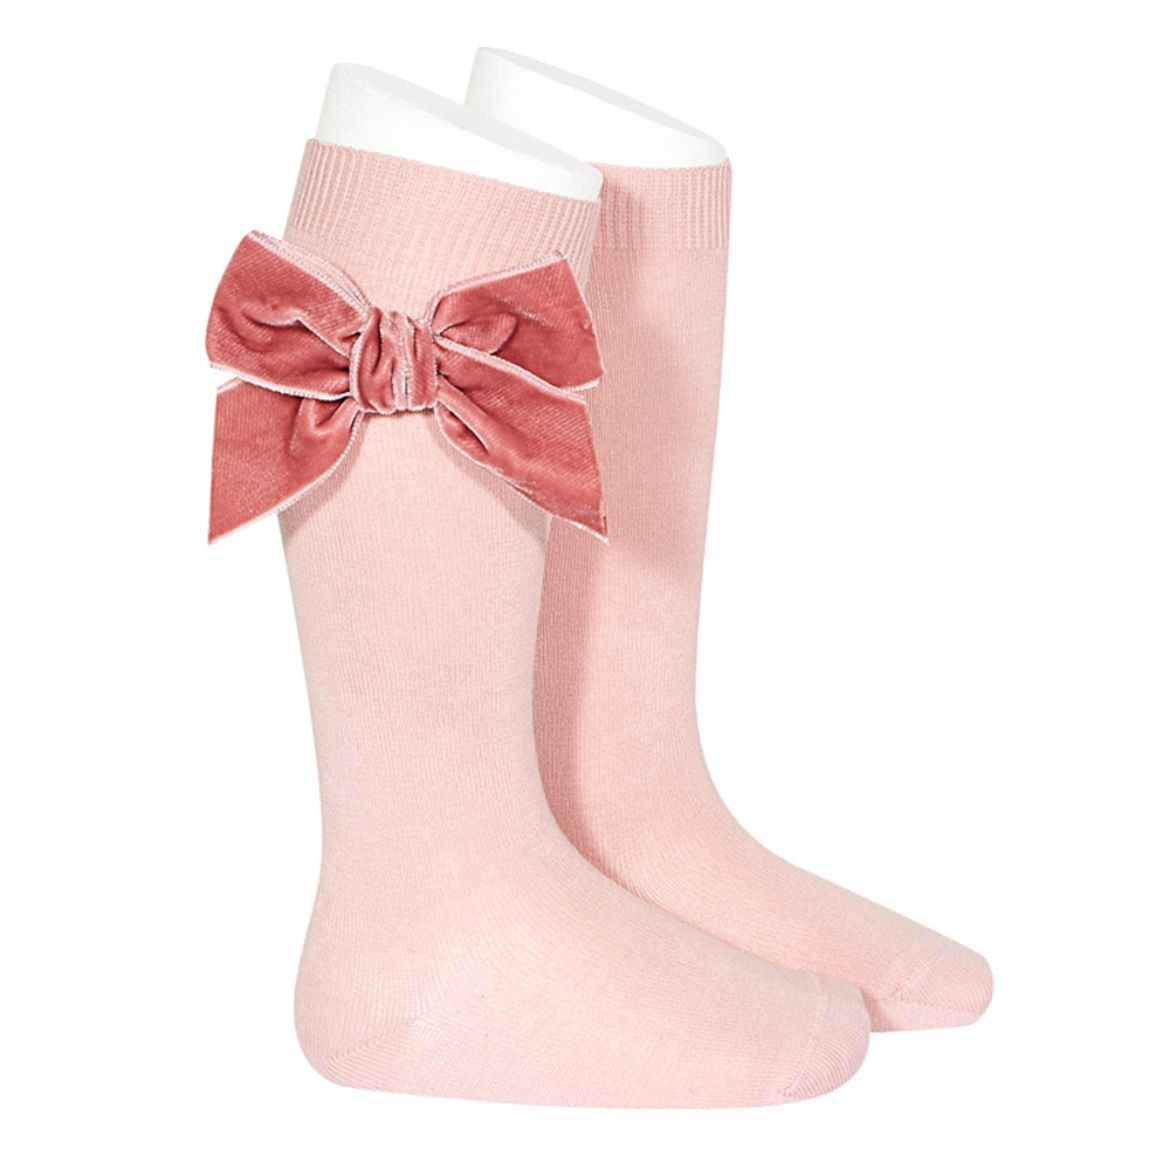 Picture of Condor Knee High Socks with Side Velvet Bow - Pale Pink